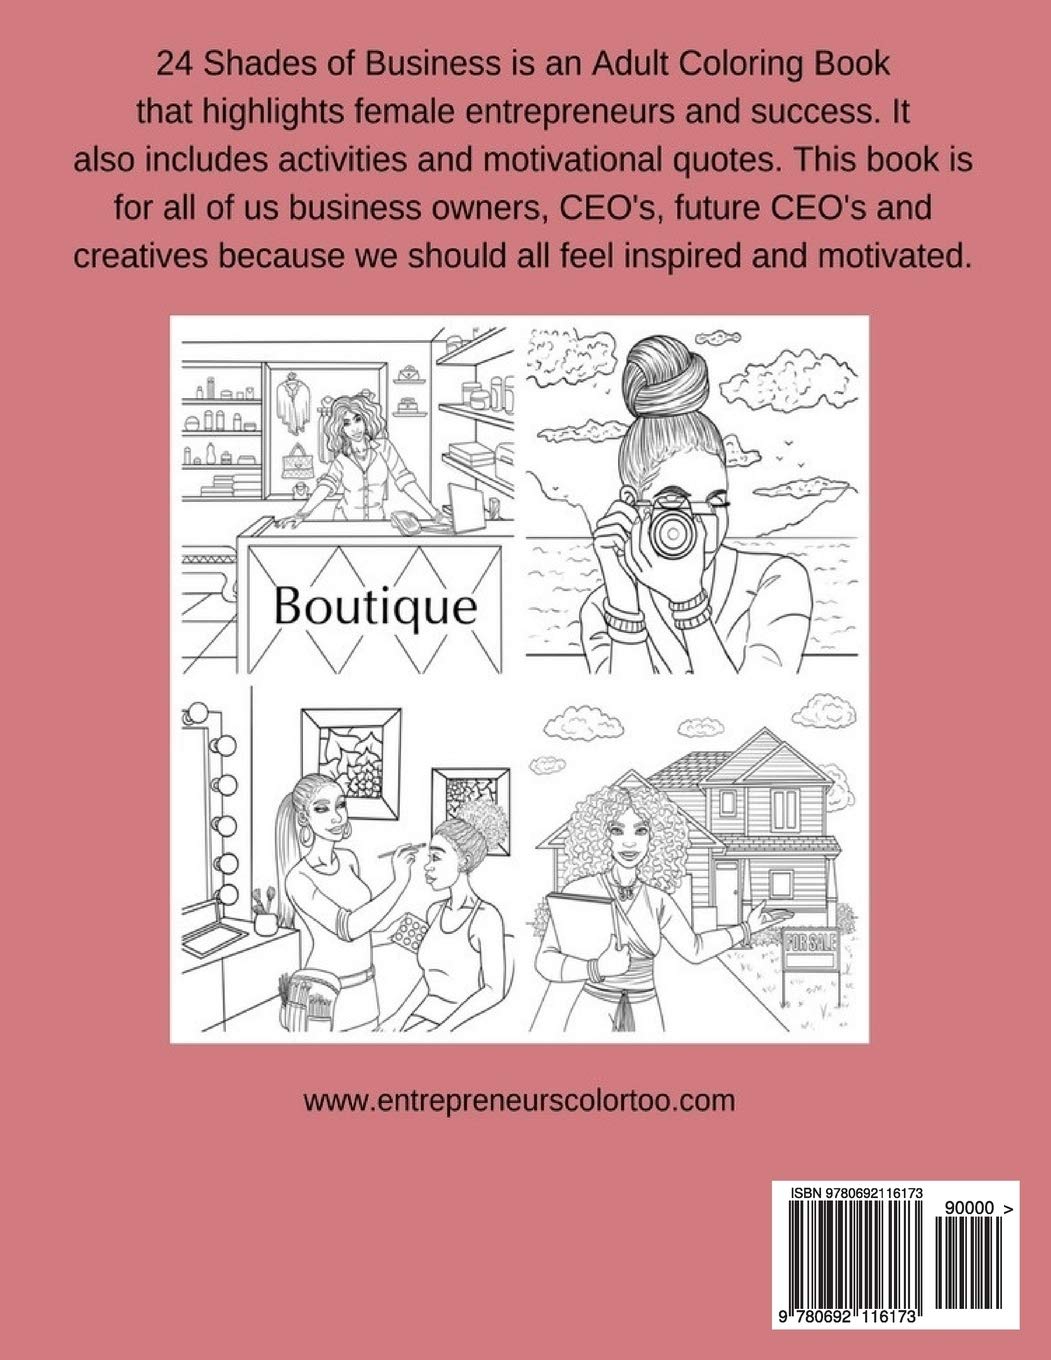 24 Shades of Business: An Adult Coloring Book